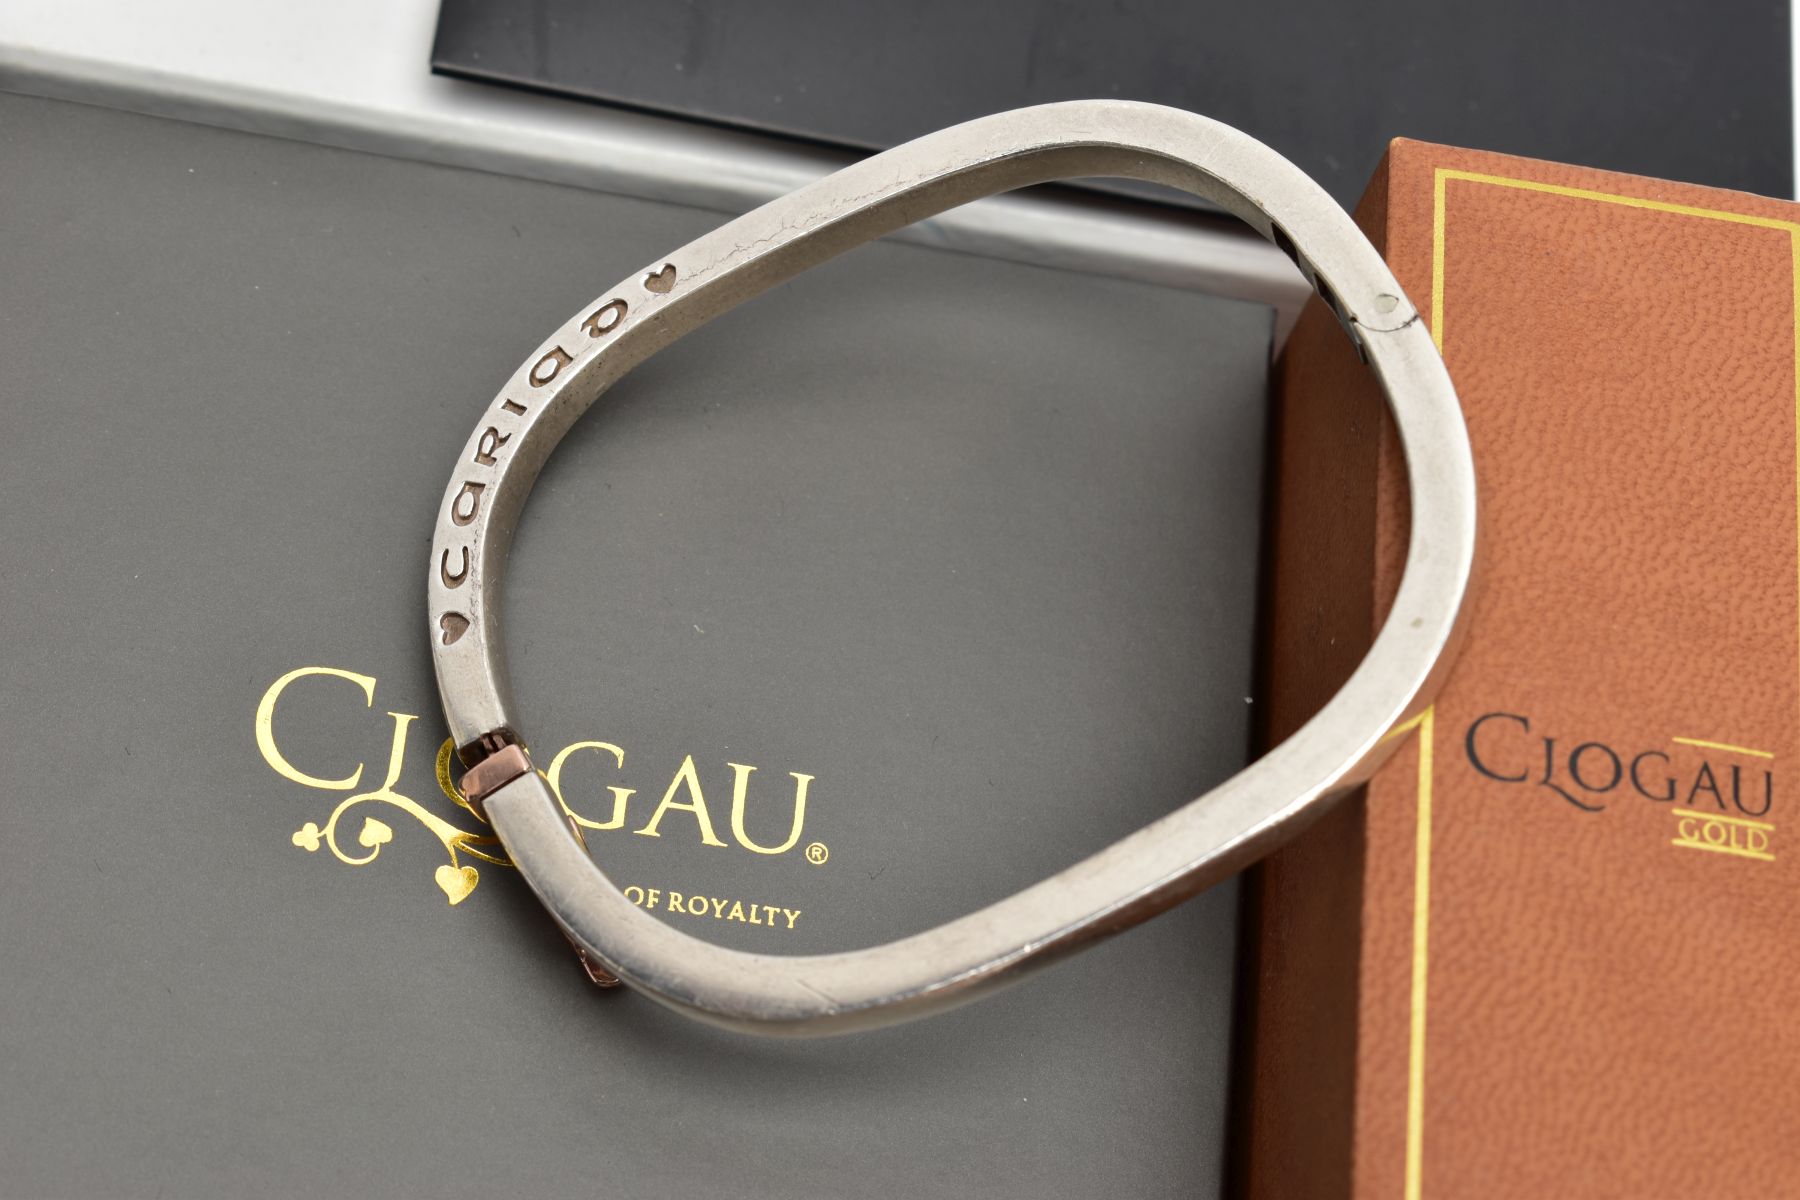 THREE ITEMS OF CLOGAU SILVER JEWELLERY, to include a 'Cariad' hinged bangle with rose gold detail to - Image 3 of 4